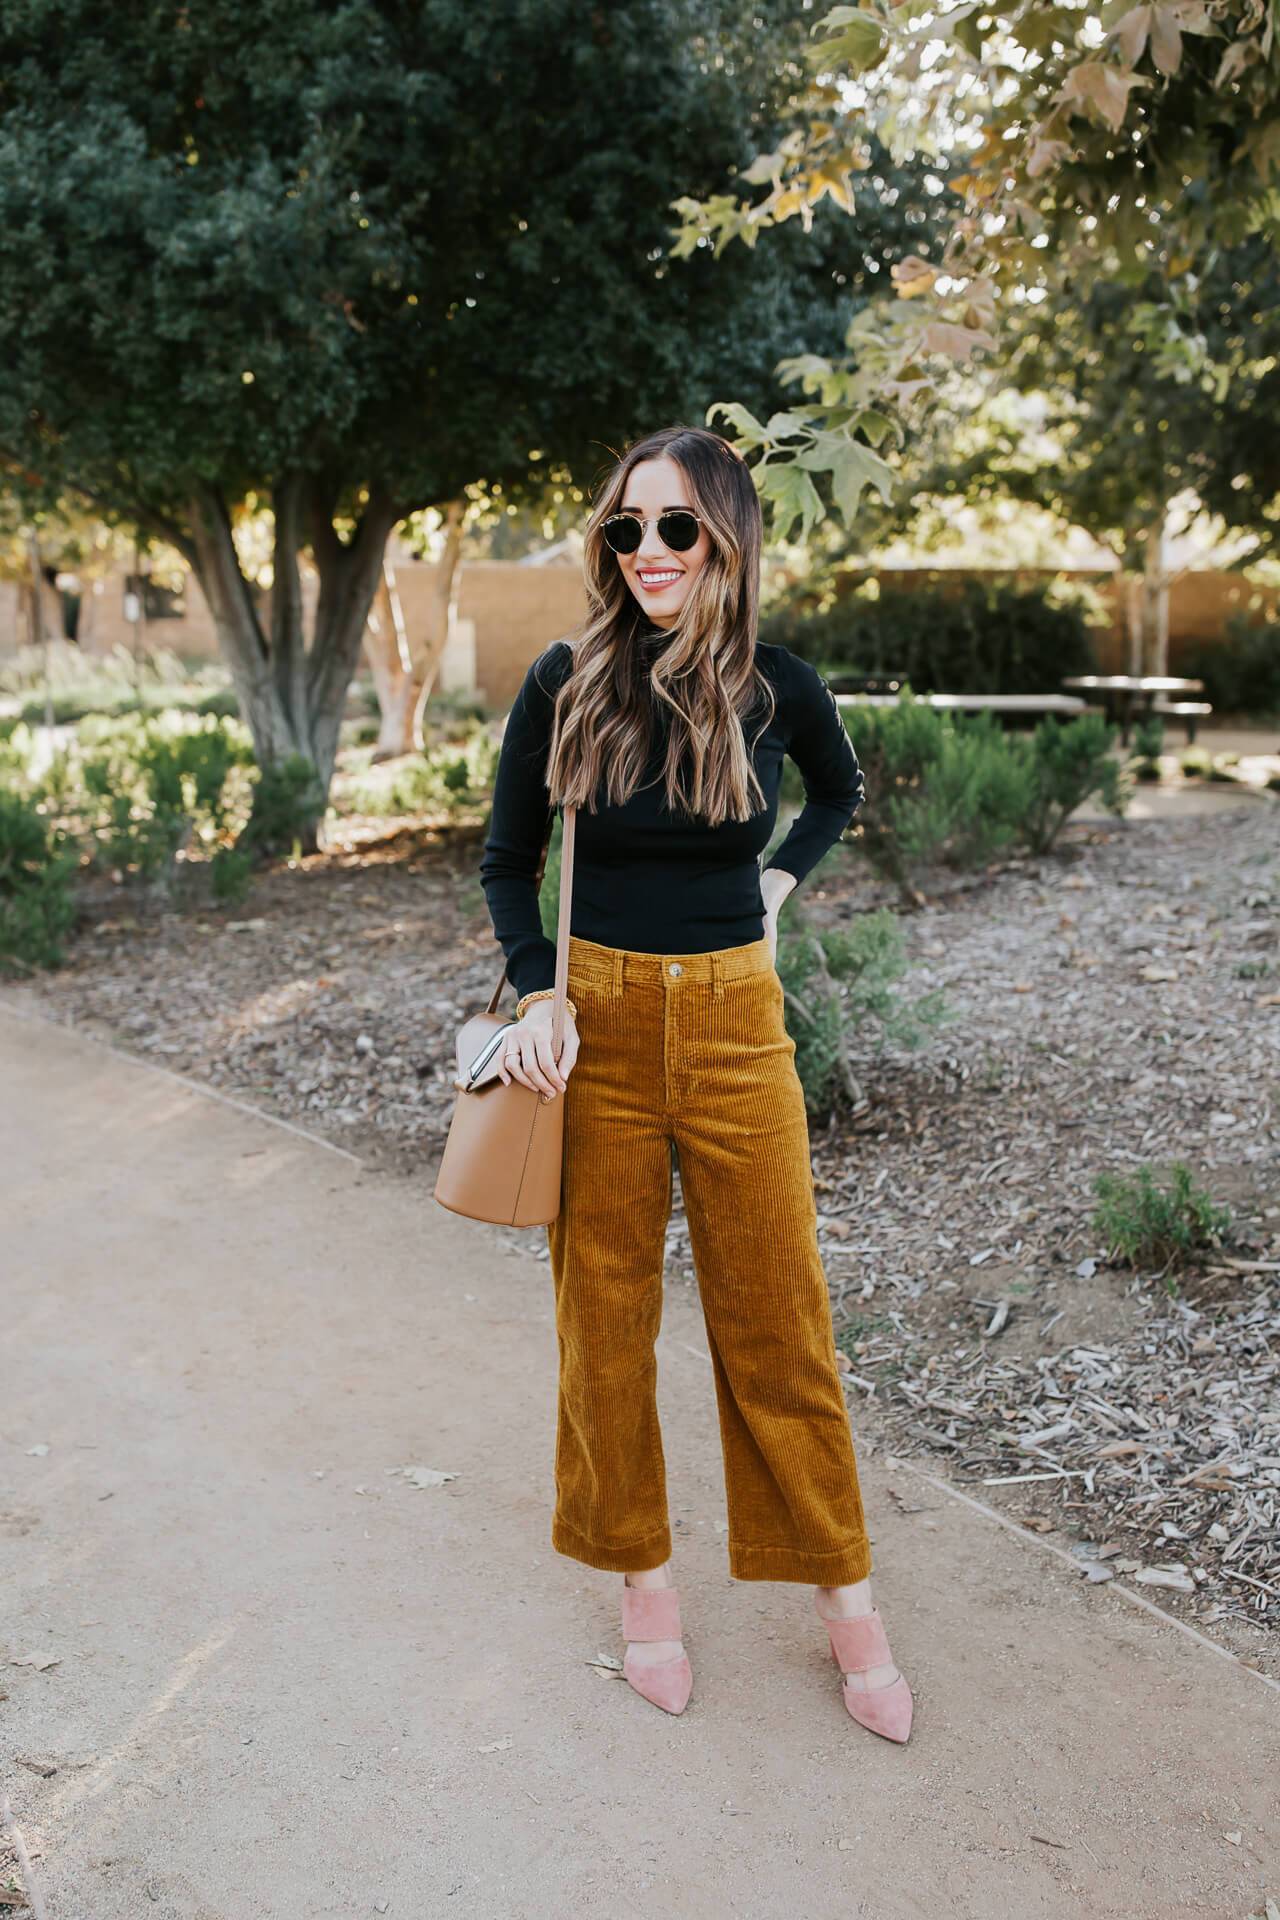 How to Style Corduroy for Basic Outfit Essentials